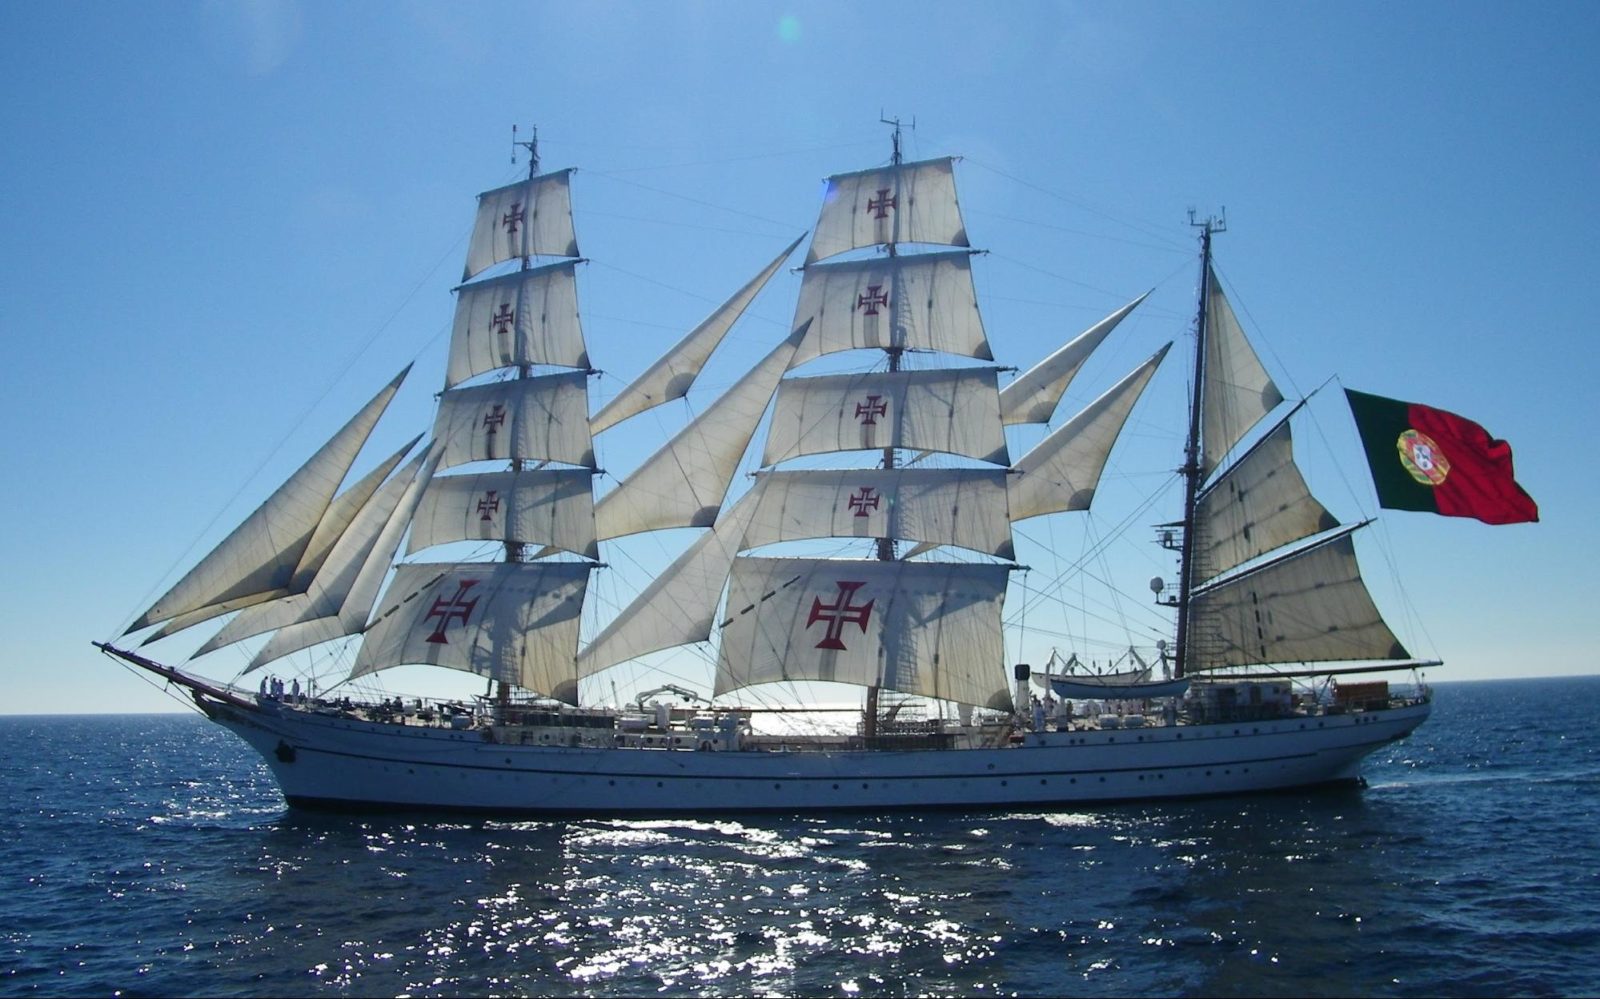 500th Anniversary Of The First Circumnavigation | North Sails